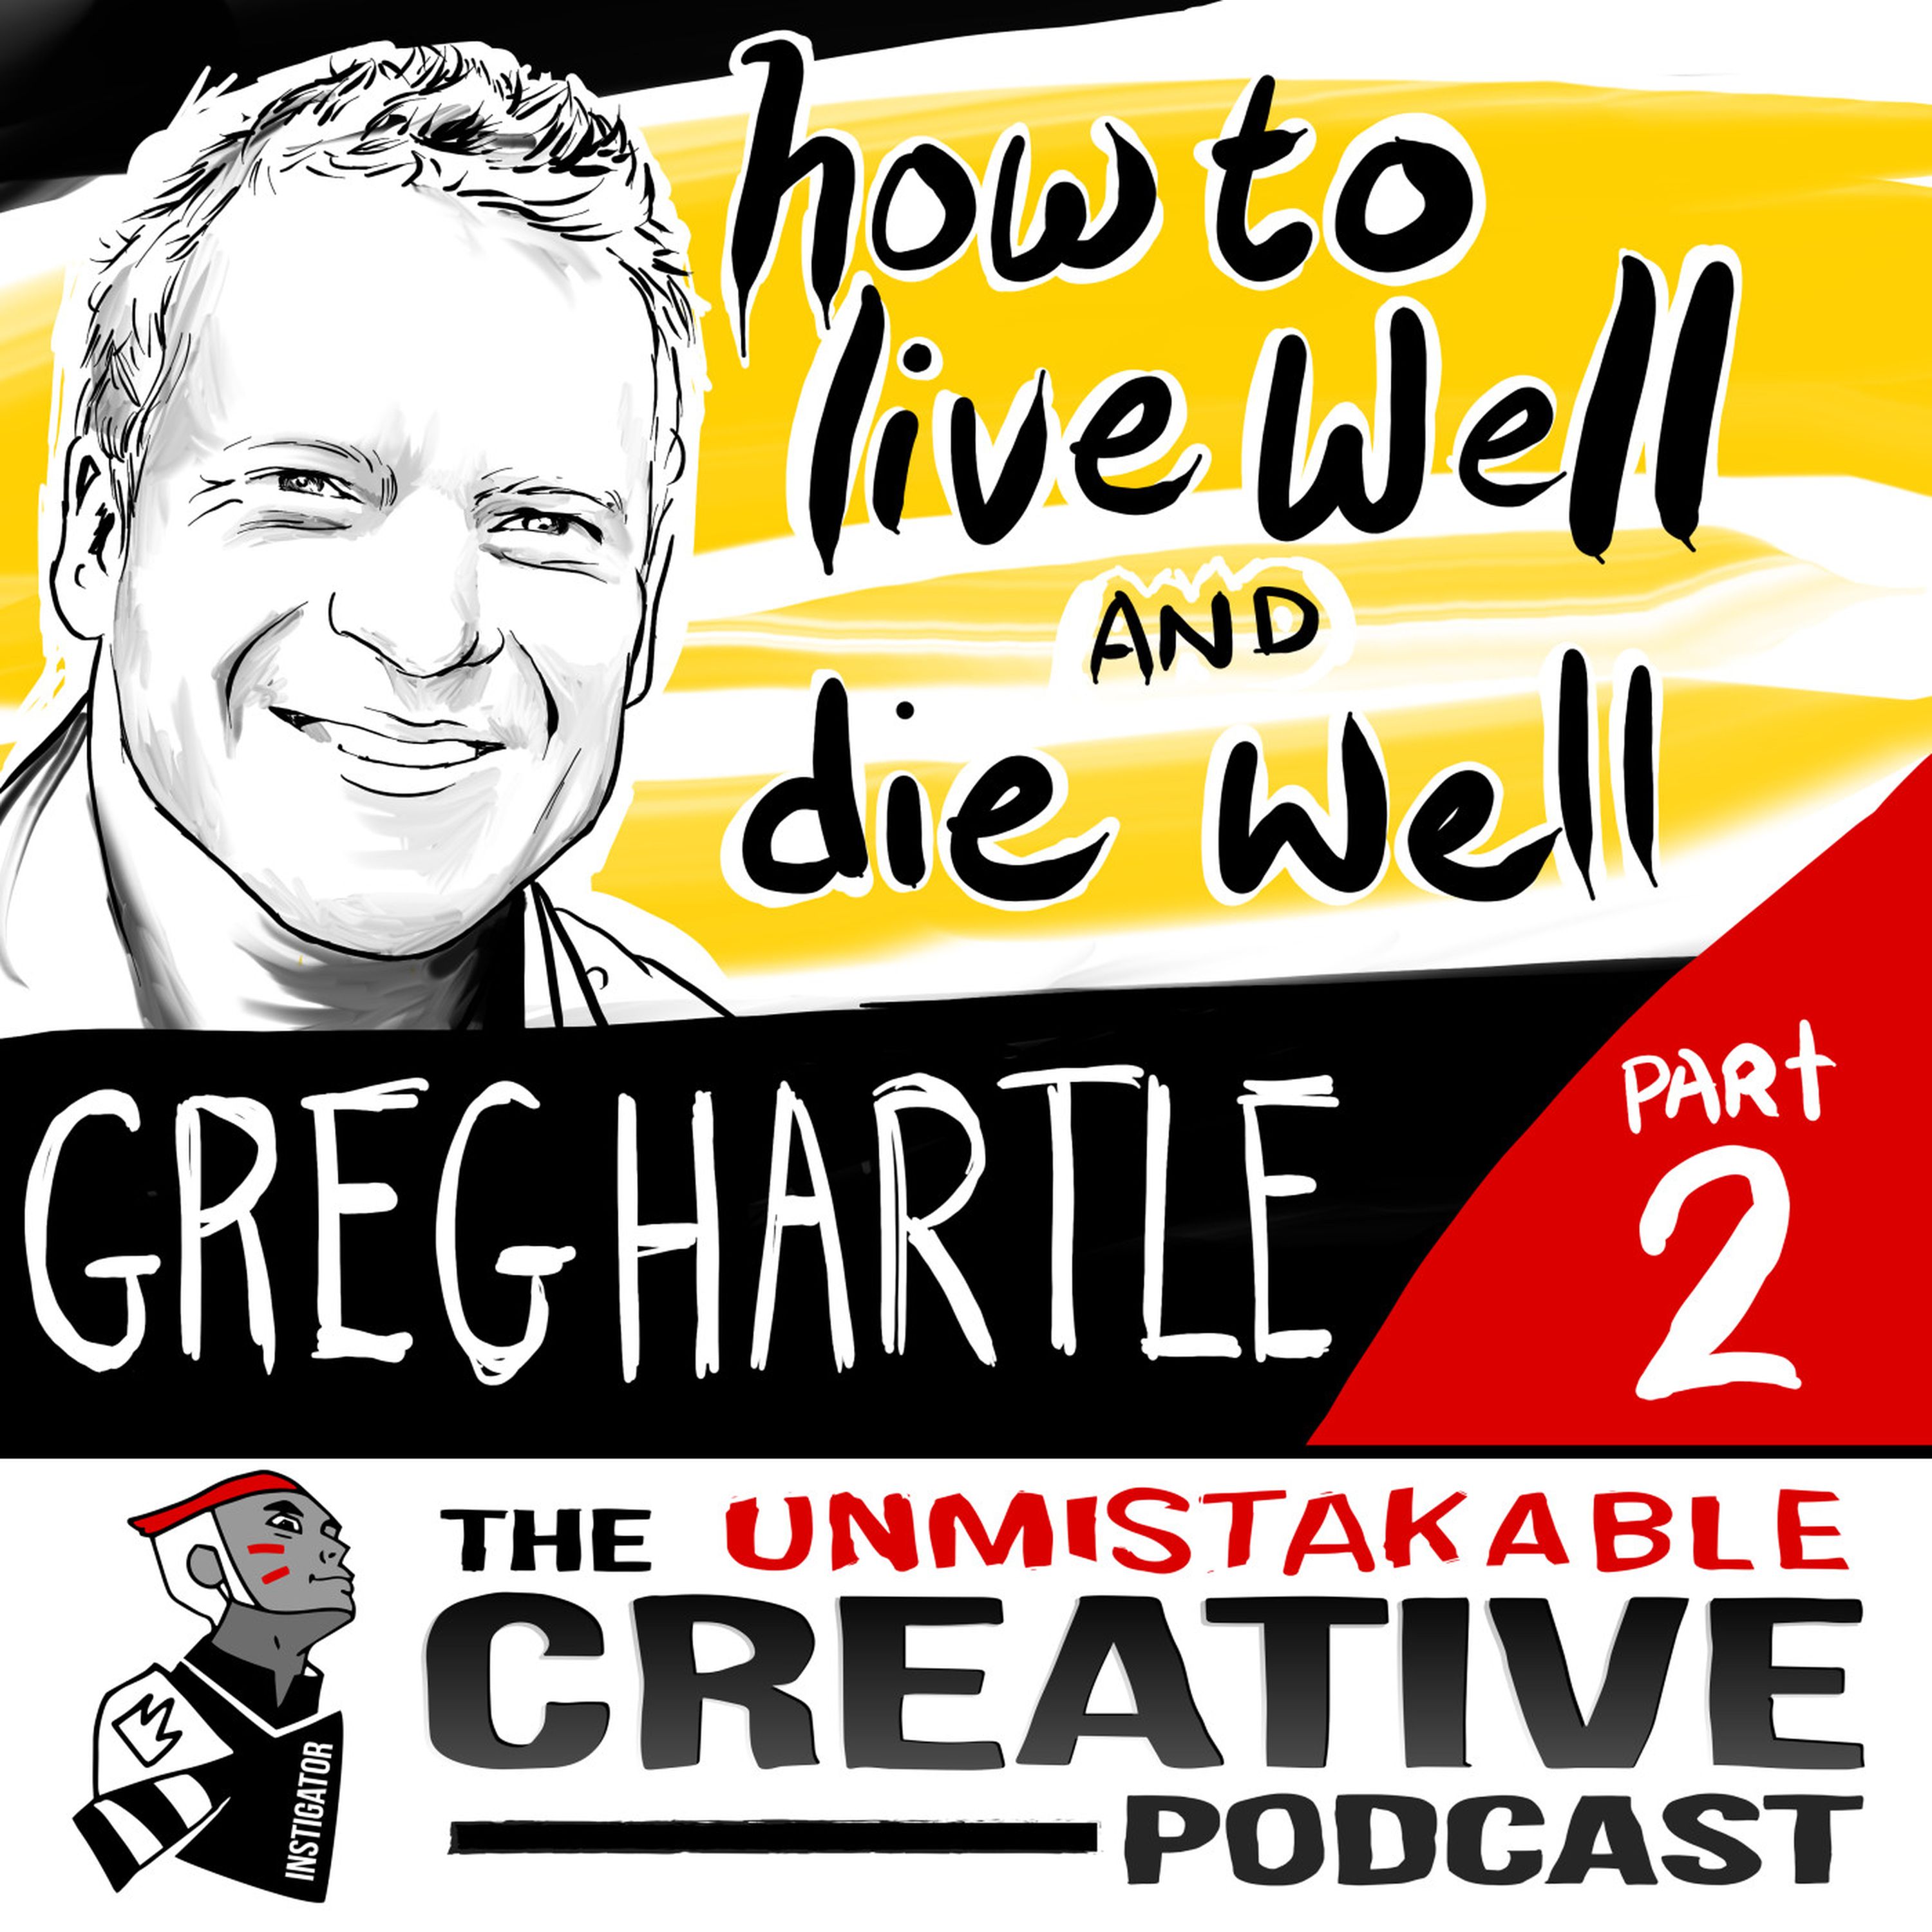 Unmistakable Classics: Greg Hartle | How to Live Well and Die Well With Greg Hartle Pt. 2